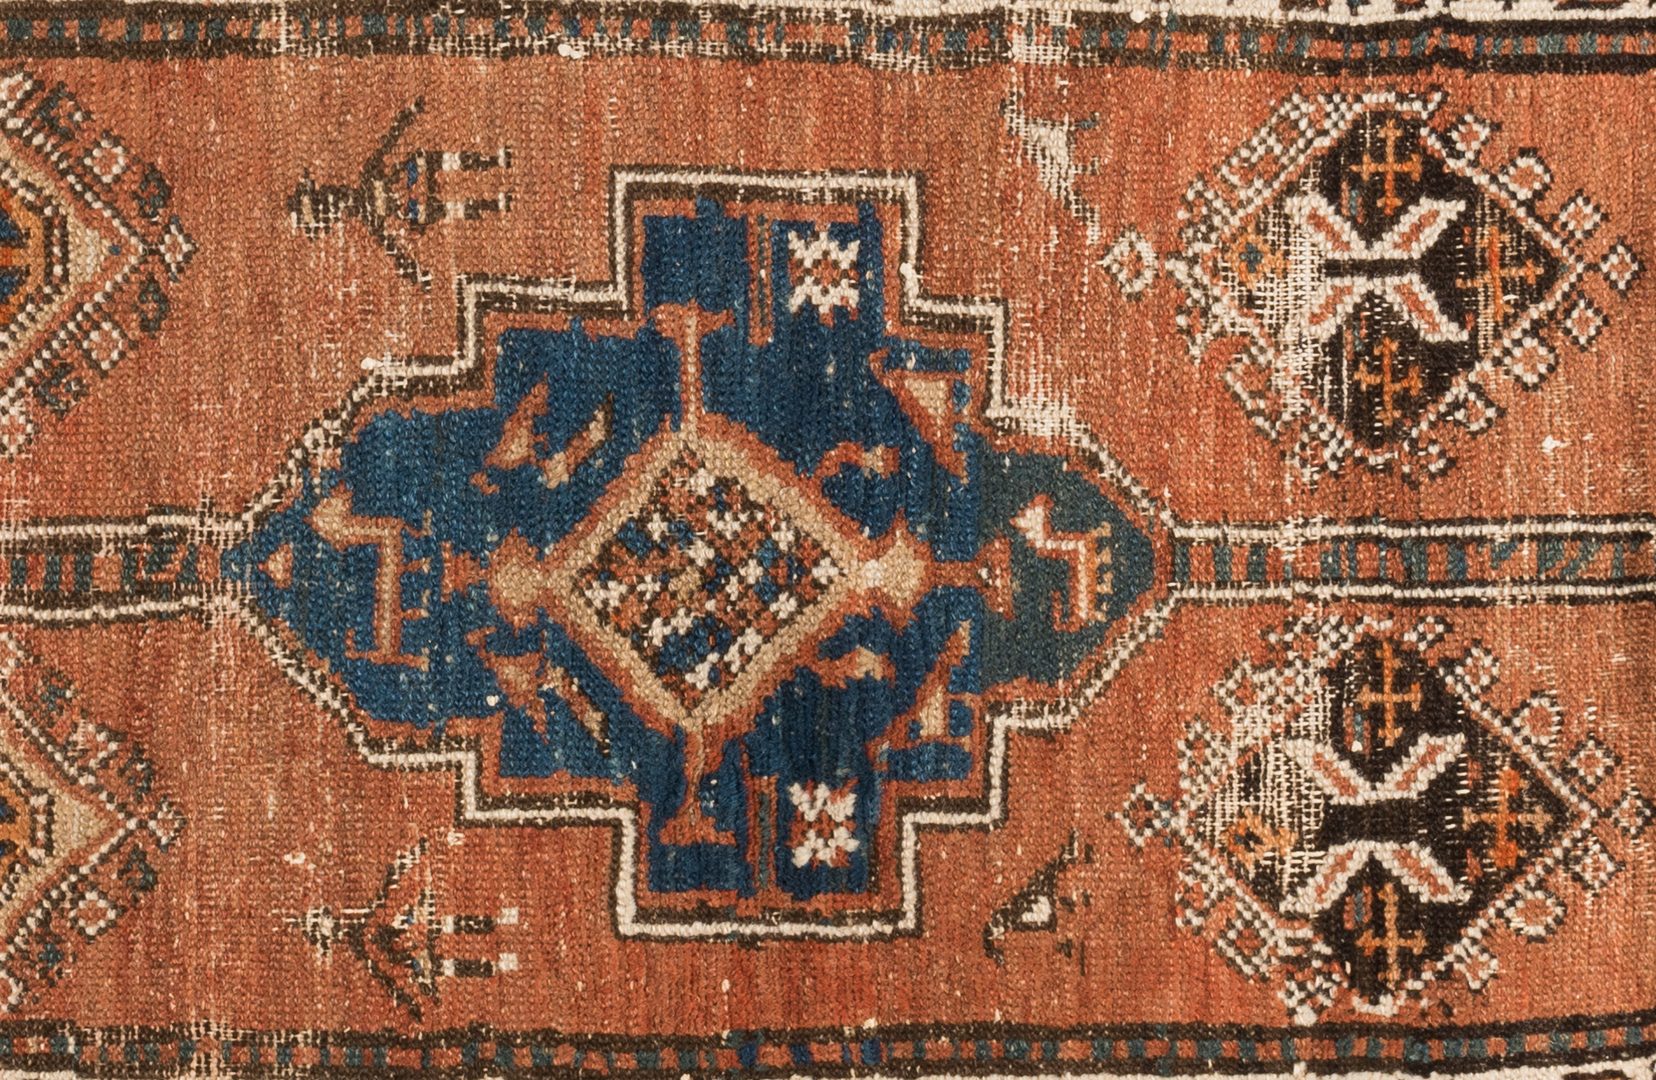 Lot 865: Antique Persian and Caucasian Runners